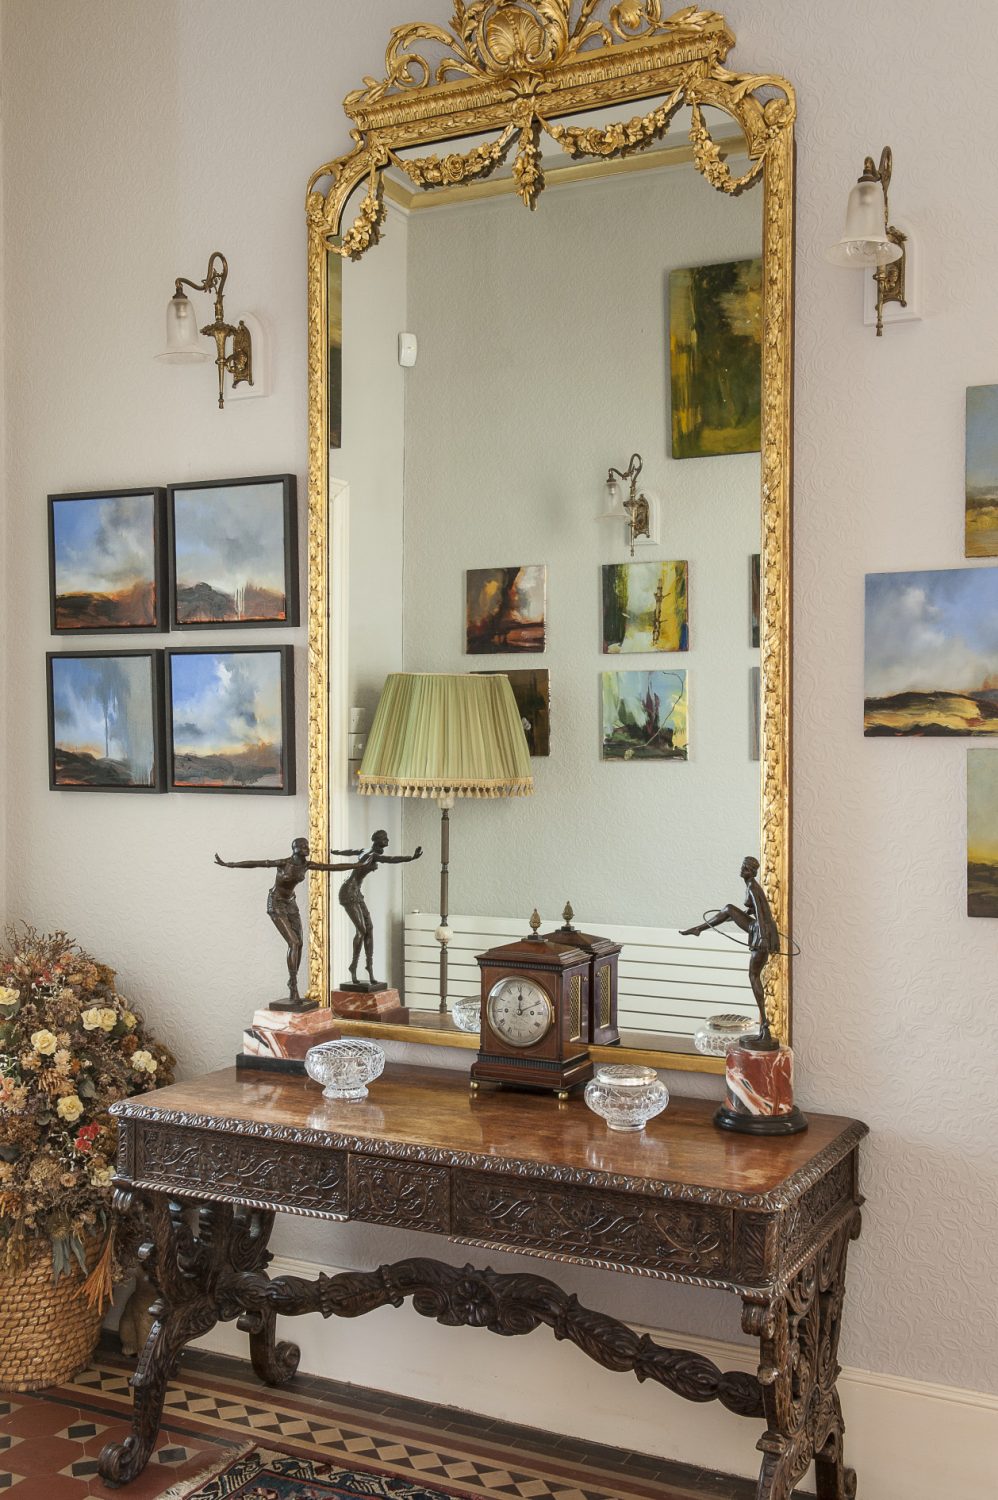 The large gilt mirror in the hallway reflects part of Ken’s collection of Rankle